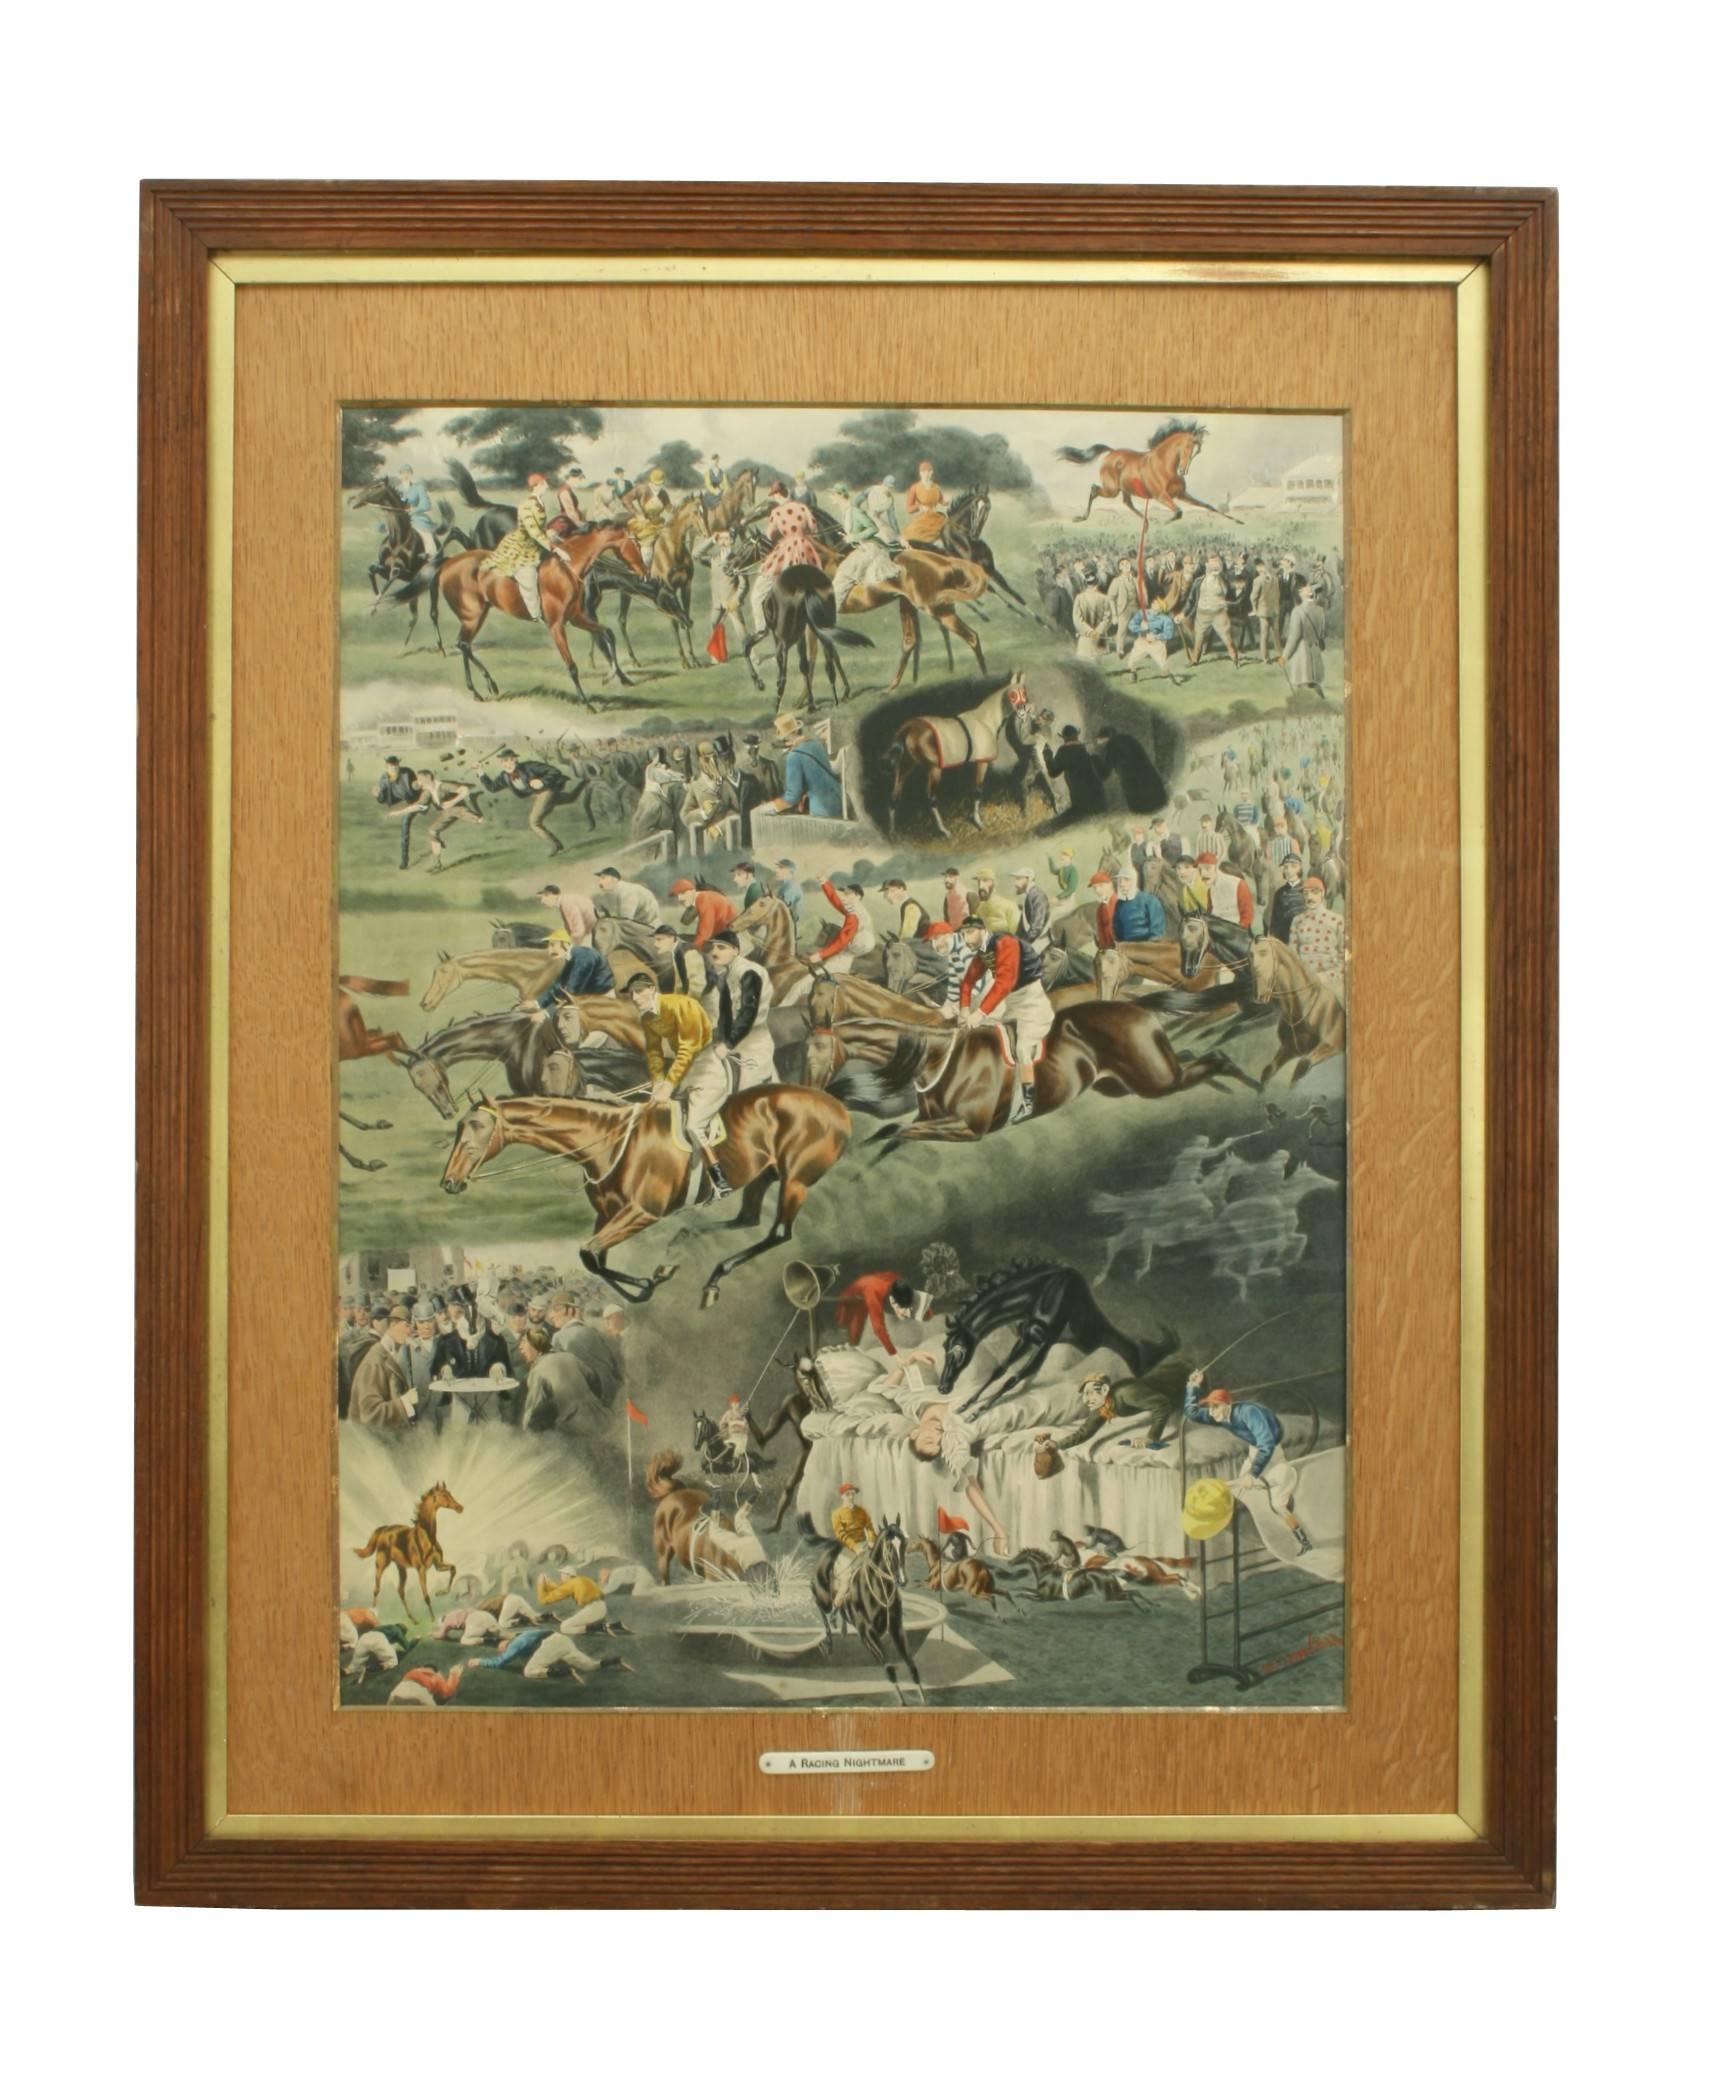 Horses racing print, a racing nightmare, Alfred Charles Havell.
A fine equestrian print by Alfred Havell entitled 'A Racing Nightmare' in original oak frame with gold slip and oak mount. The lithograph is hand colored and published by Fores. The